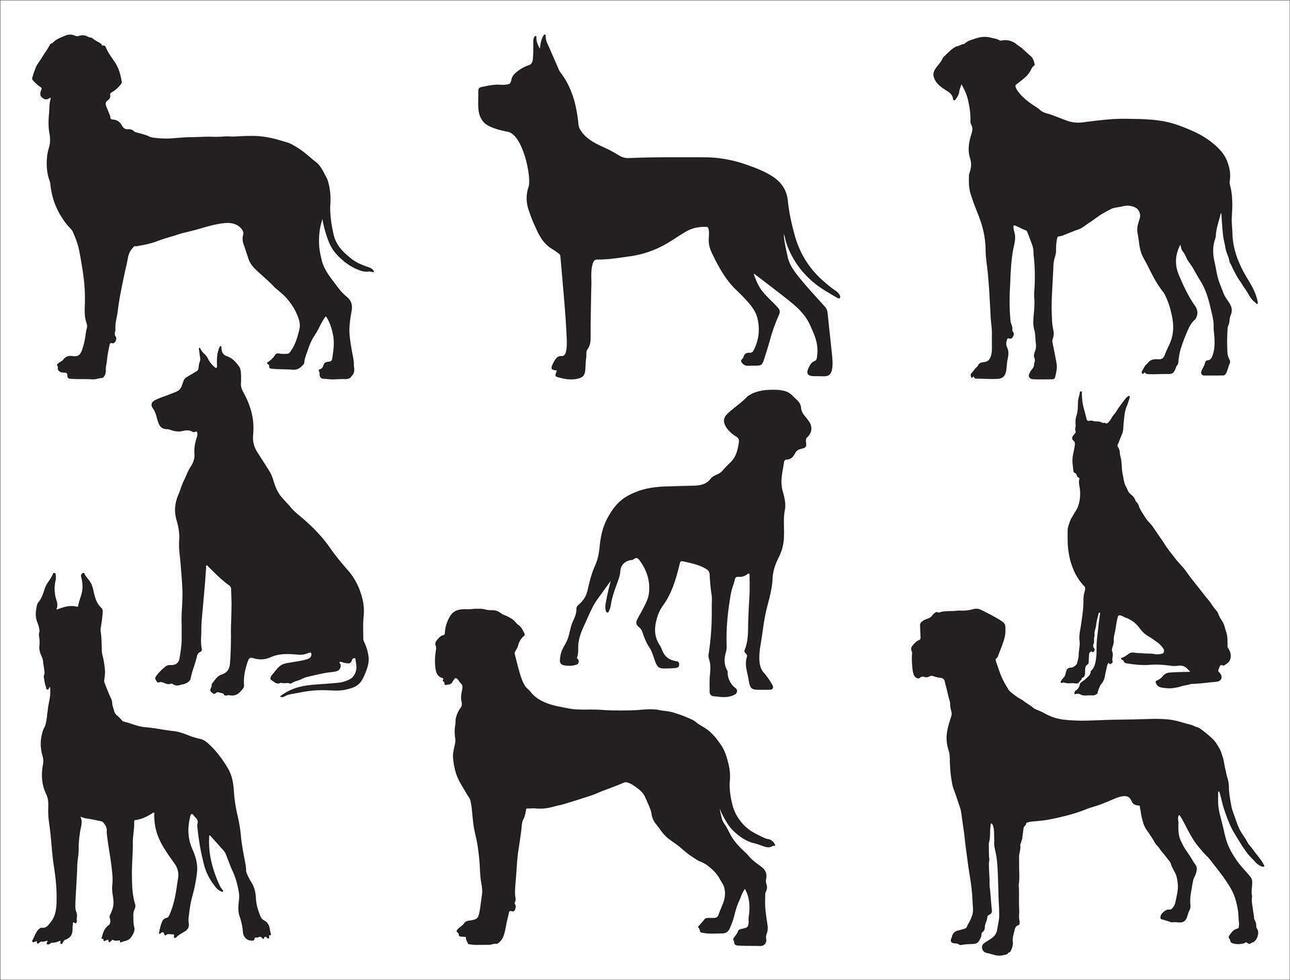 Great dane dogs silhouette on white background vector